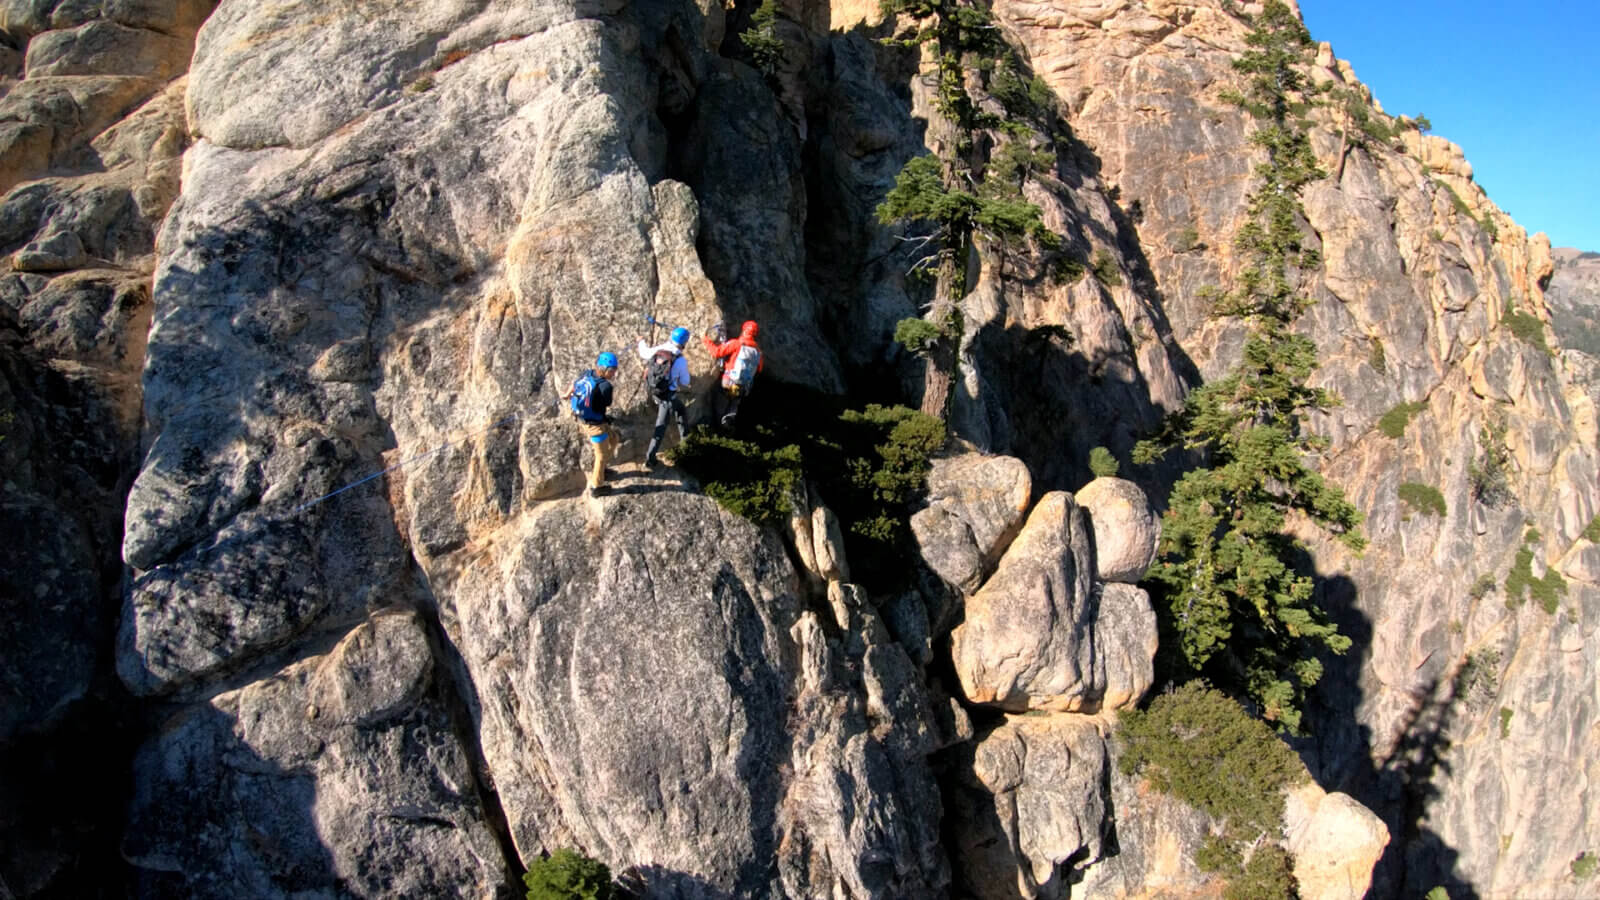 A group of climbers standing on the Tahoe Via Ferrata above Palisades Tahoe Village in Olympic Valley, CA. One of the best Lake Tahoe adventures!